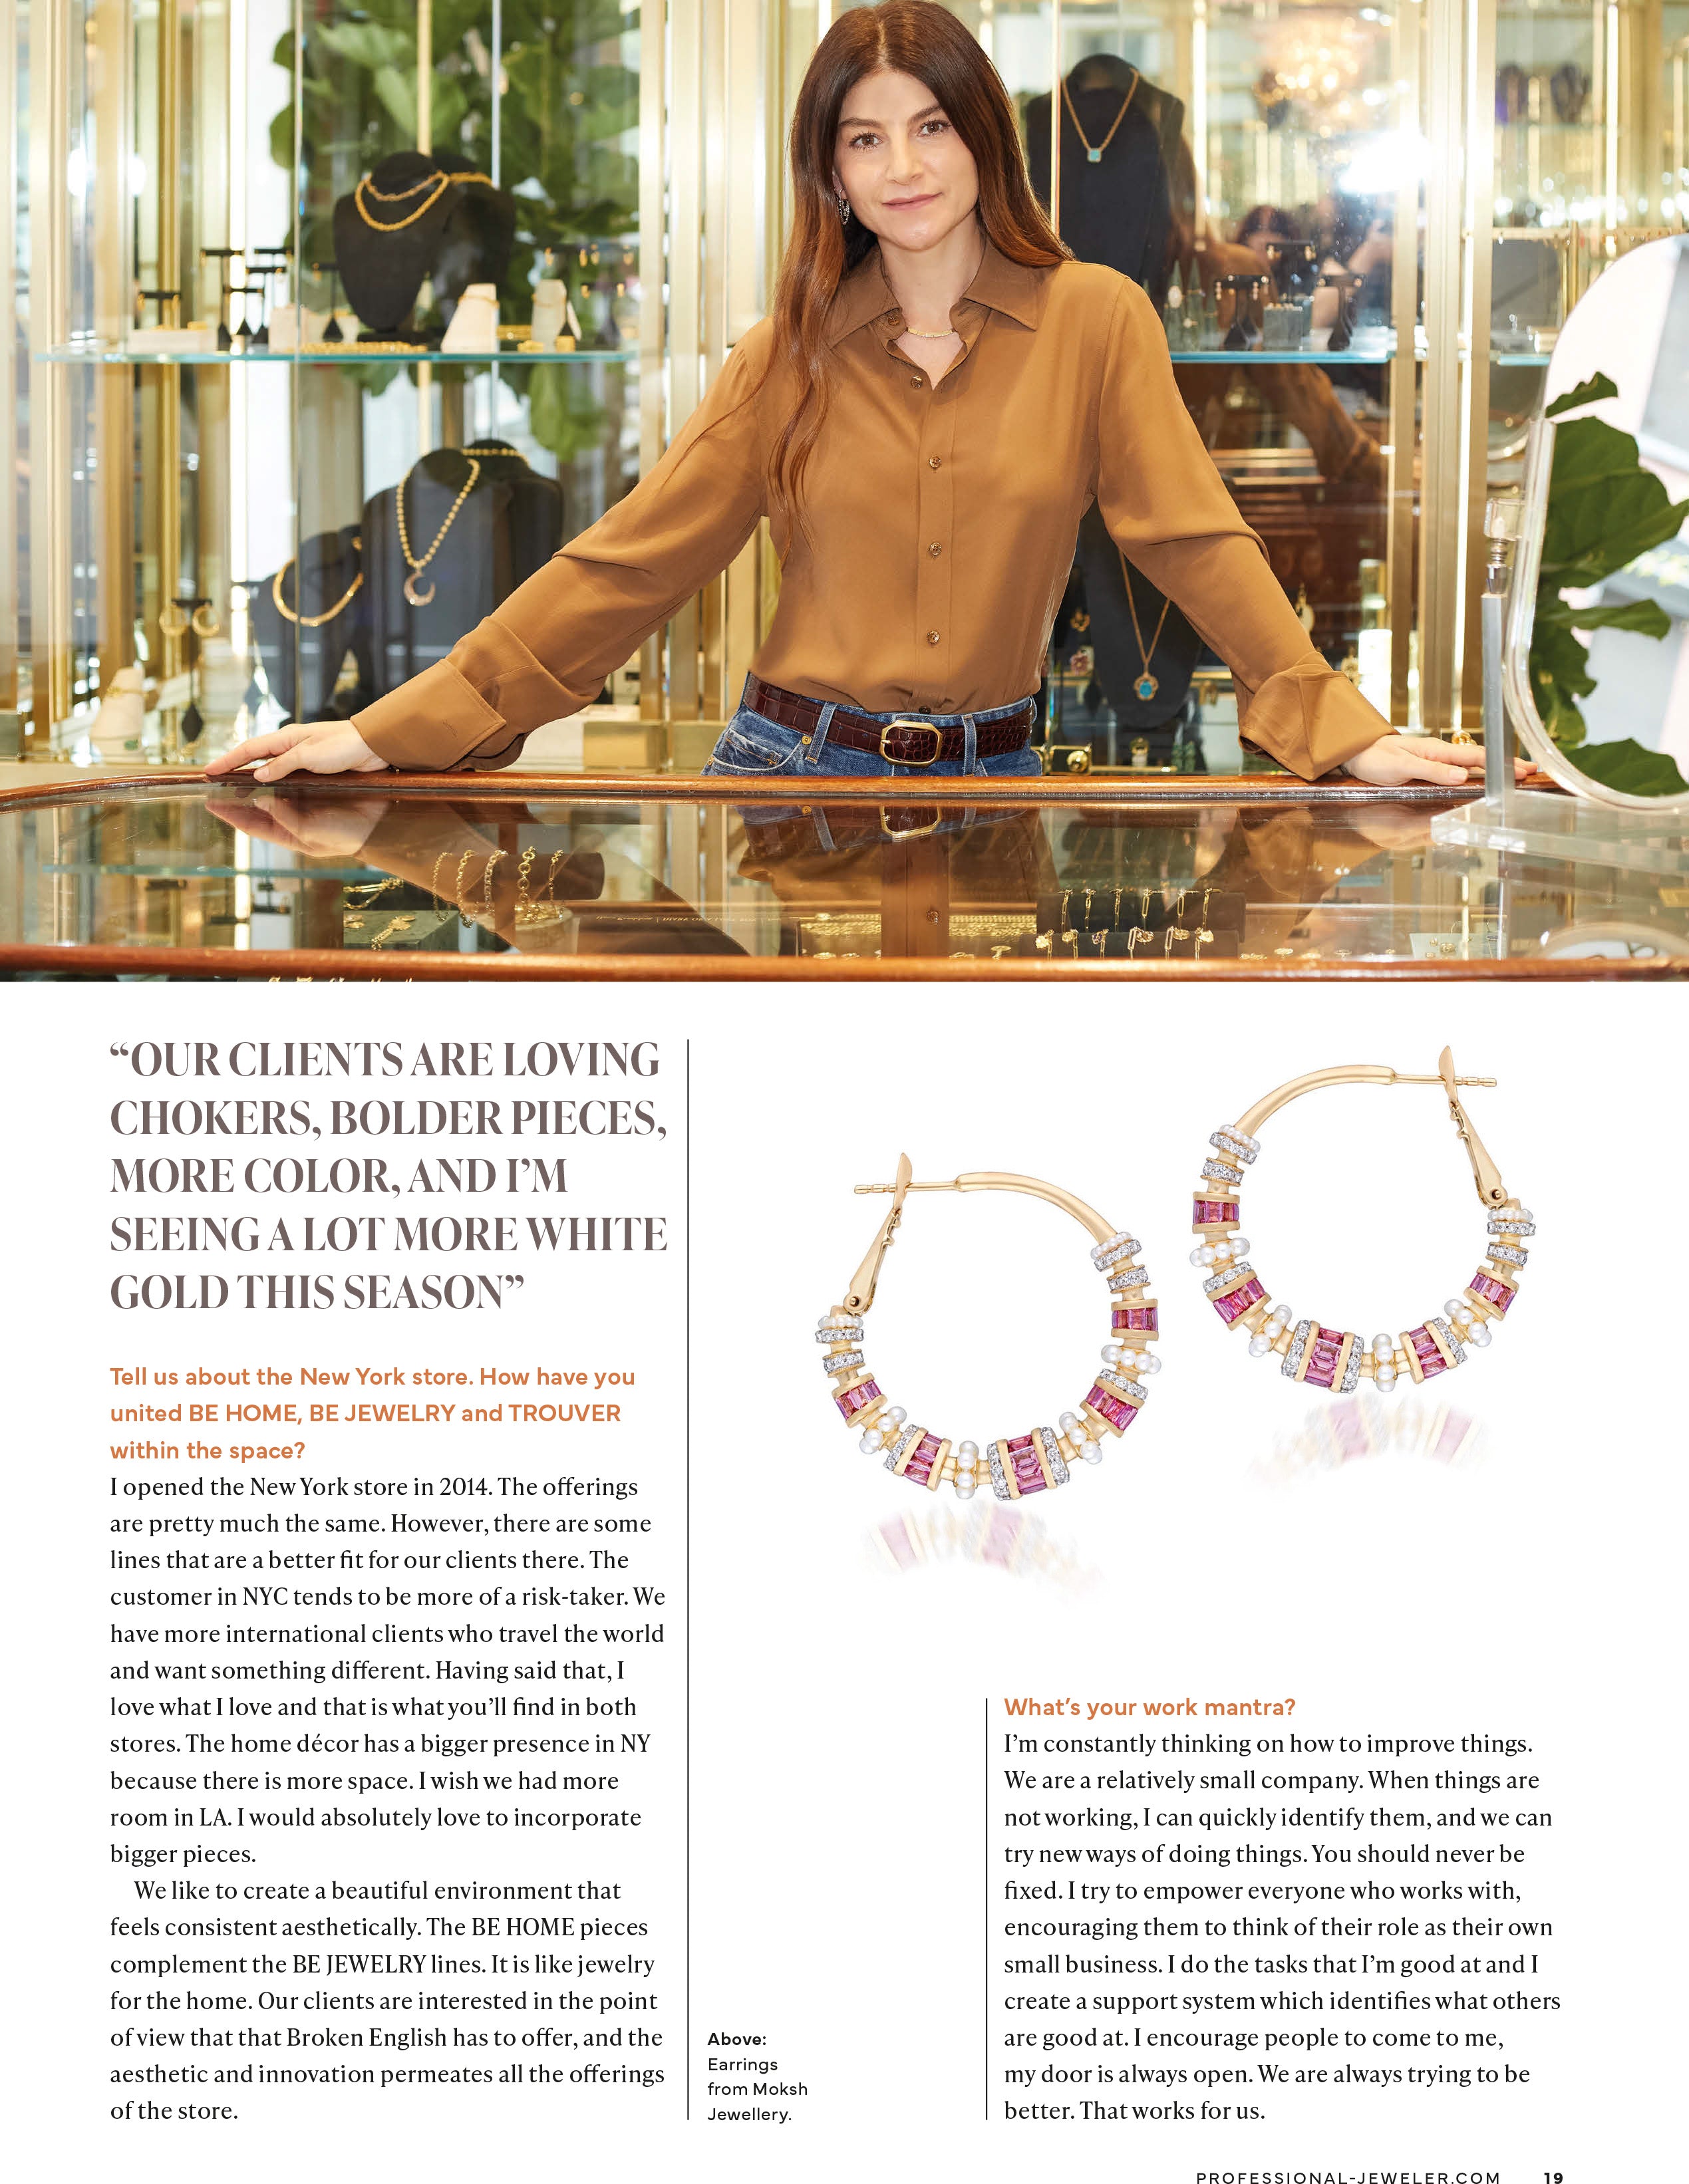 Broken English Jewelry featured in the September 2023 issue of Professional Jeweler, Speaking the Language of Jewelry